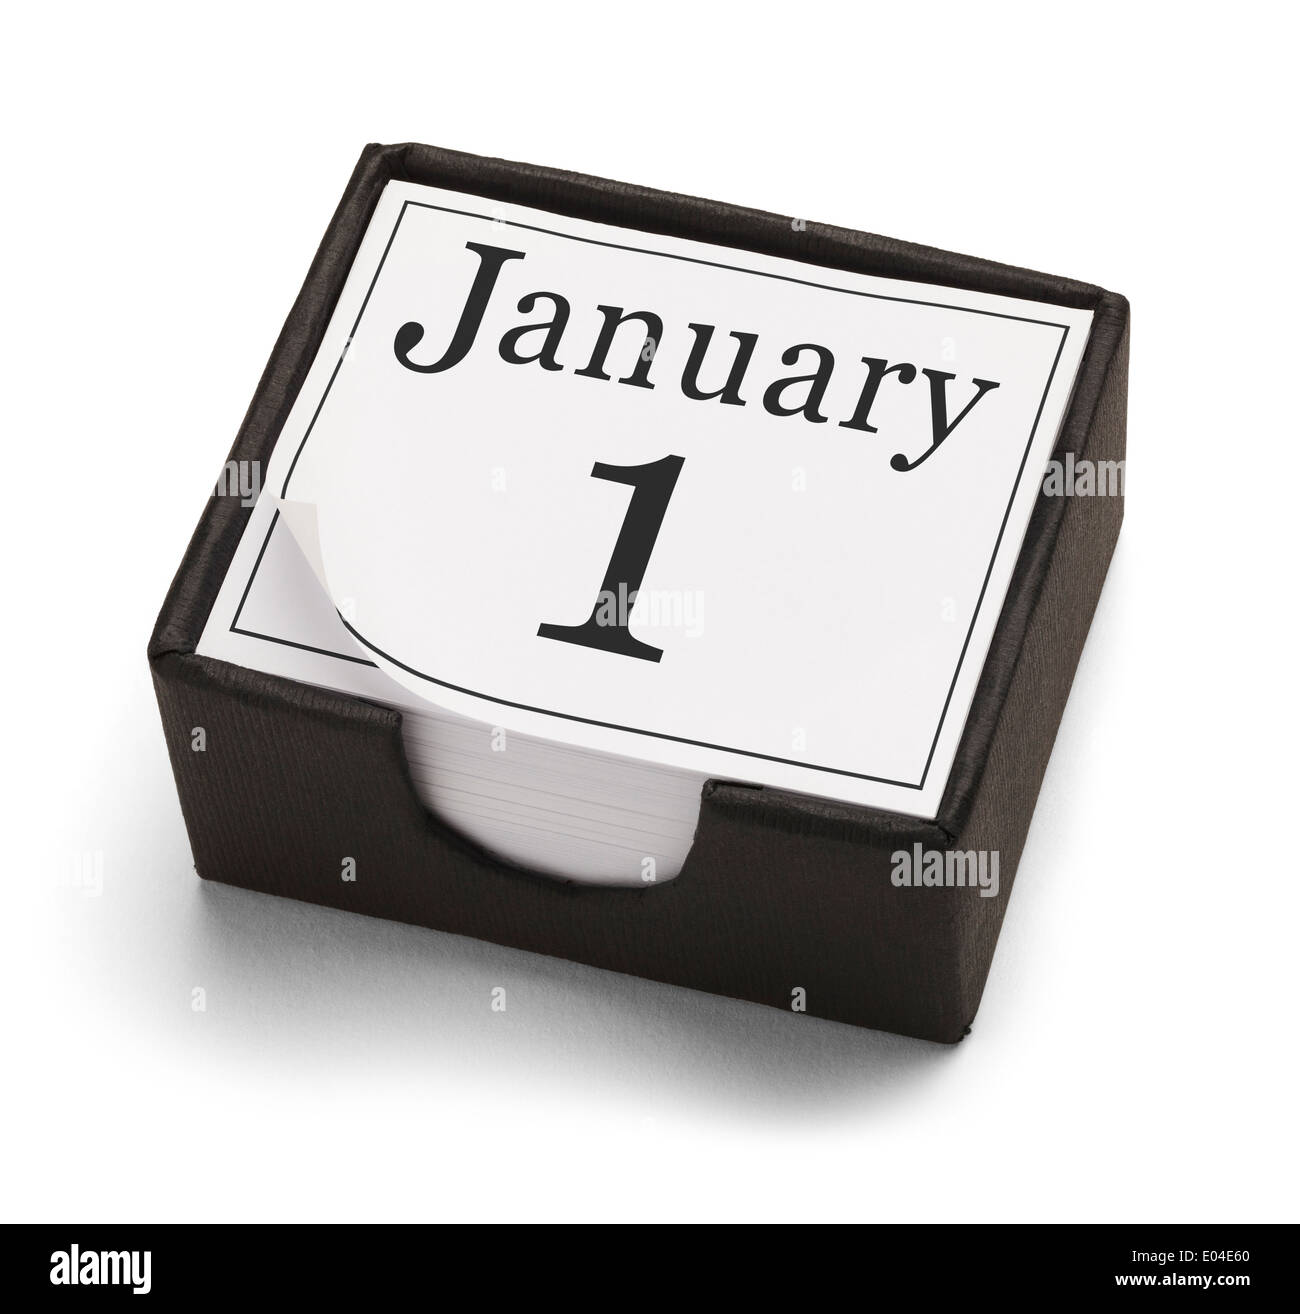 New Years Day Desk Calendar Isolated on White Background. Stock Photo